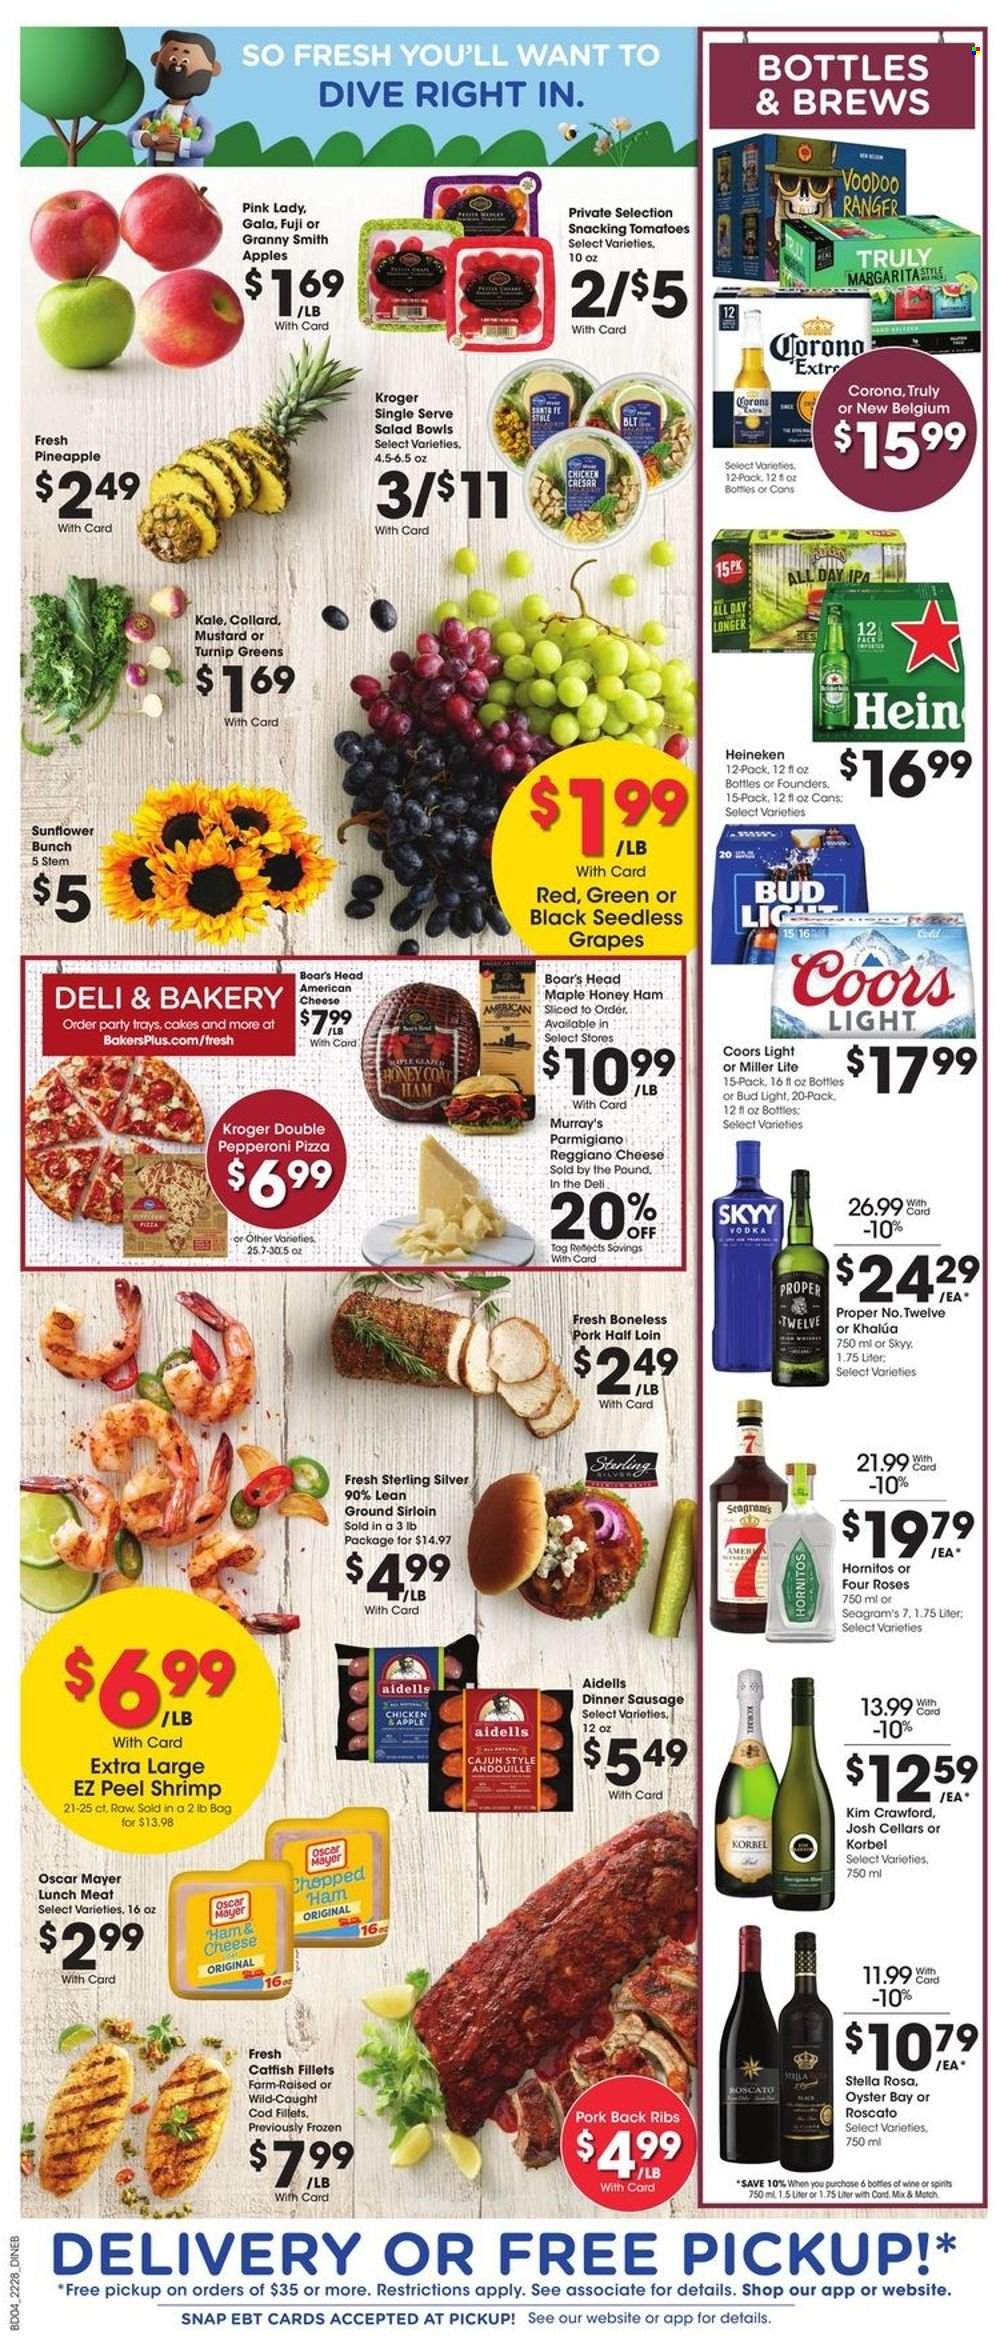 thumbnail - Baker's Flyer - 08/10/2022 - 08/16/2022 - Sales products - cake, kale, apples, Gala, grapes, seedless grapes, pineapple, Granny Smith, Pink Lady, catfish, cod, oysters, shrimps, pizza, ham, Oscar Mayer, sausage, pepperoni, lunch meat, american cheese, Parmigiano Reggiano, mustard, wine, vodka, SKYY, TRULY, beer, Bud Light, Corona Extra, Heineken, IPA, pork meat, pork ribs, pork back ribs, salad bowl, sunflower, Miller Lite, Coors. Page 3.